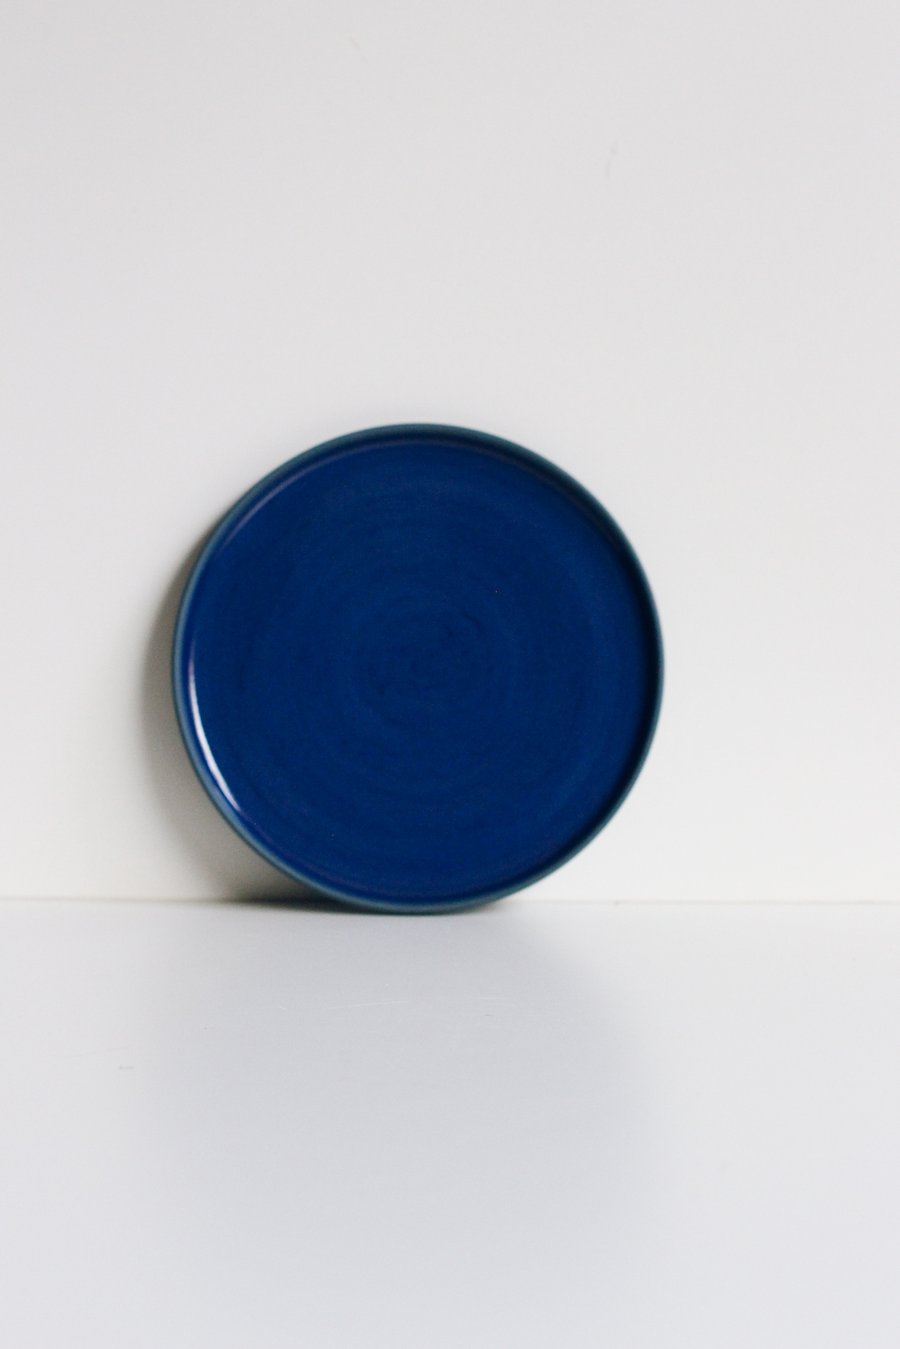 Image of Dinner Plate / Various Shades